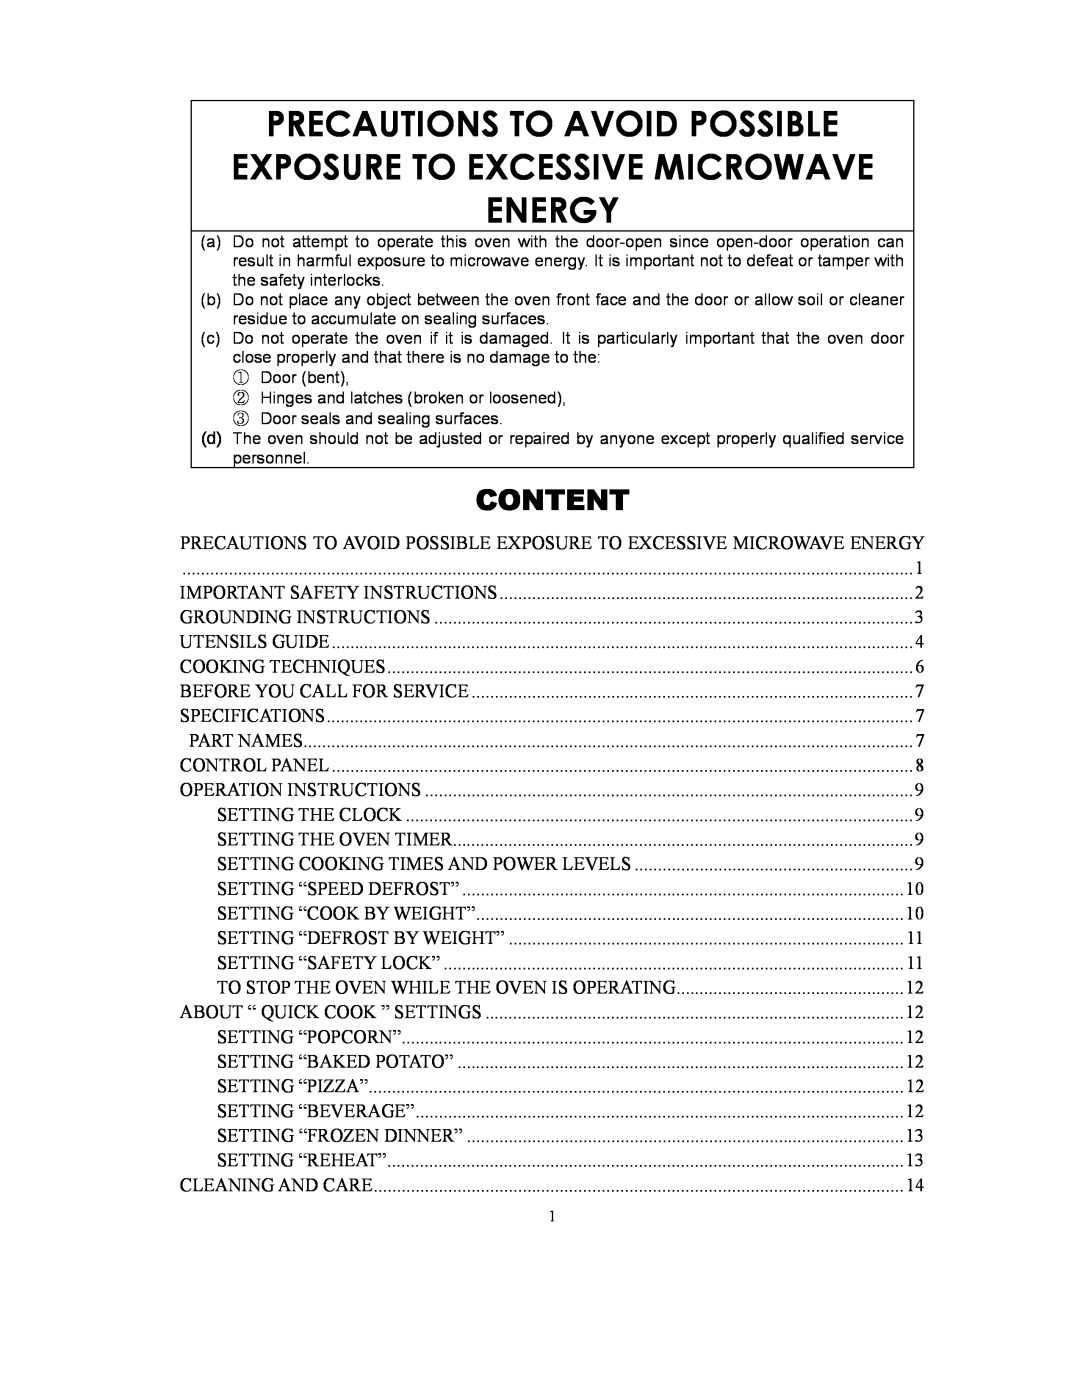 Sunbeam SMW729 owner manual Precautions To Avoid Possible Exposure To Excessive Microwave Energy, Content 